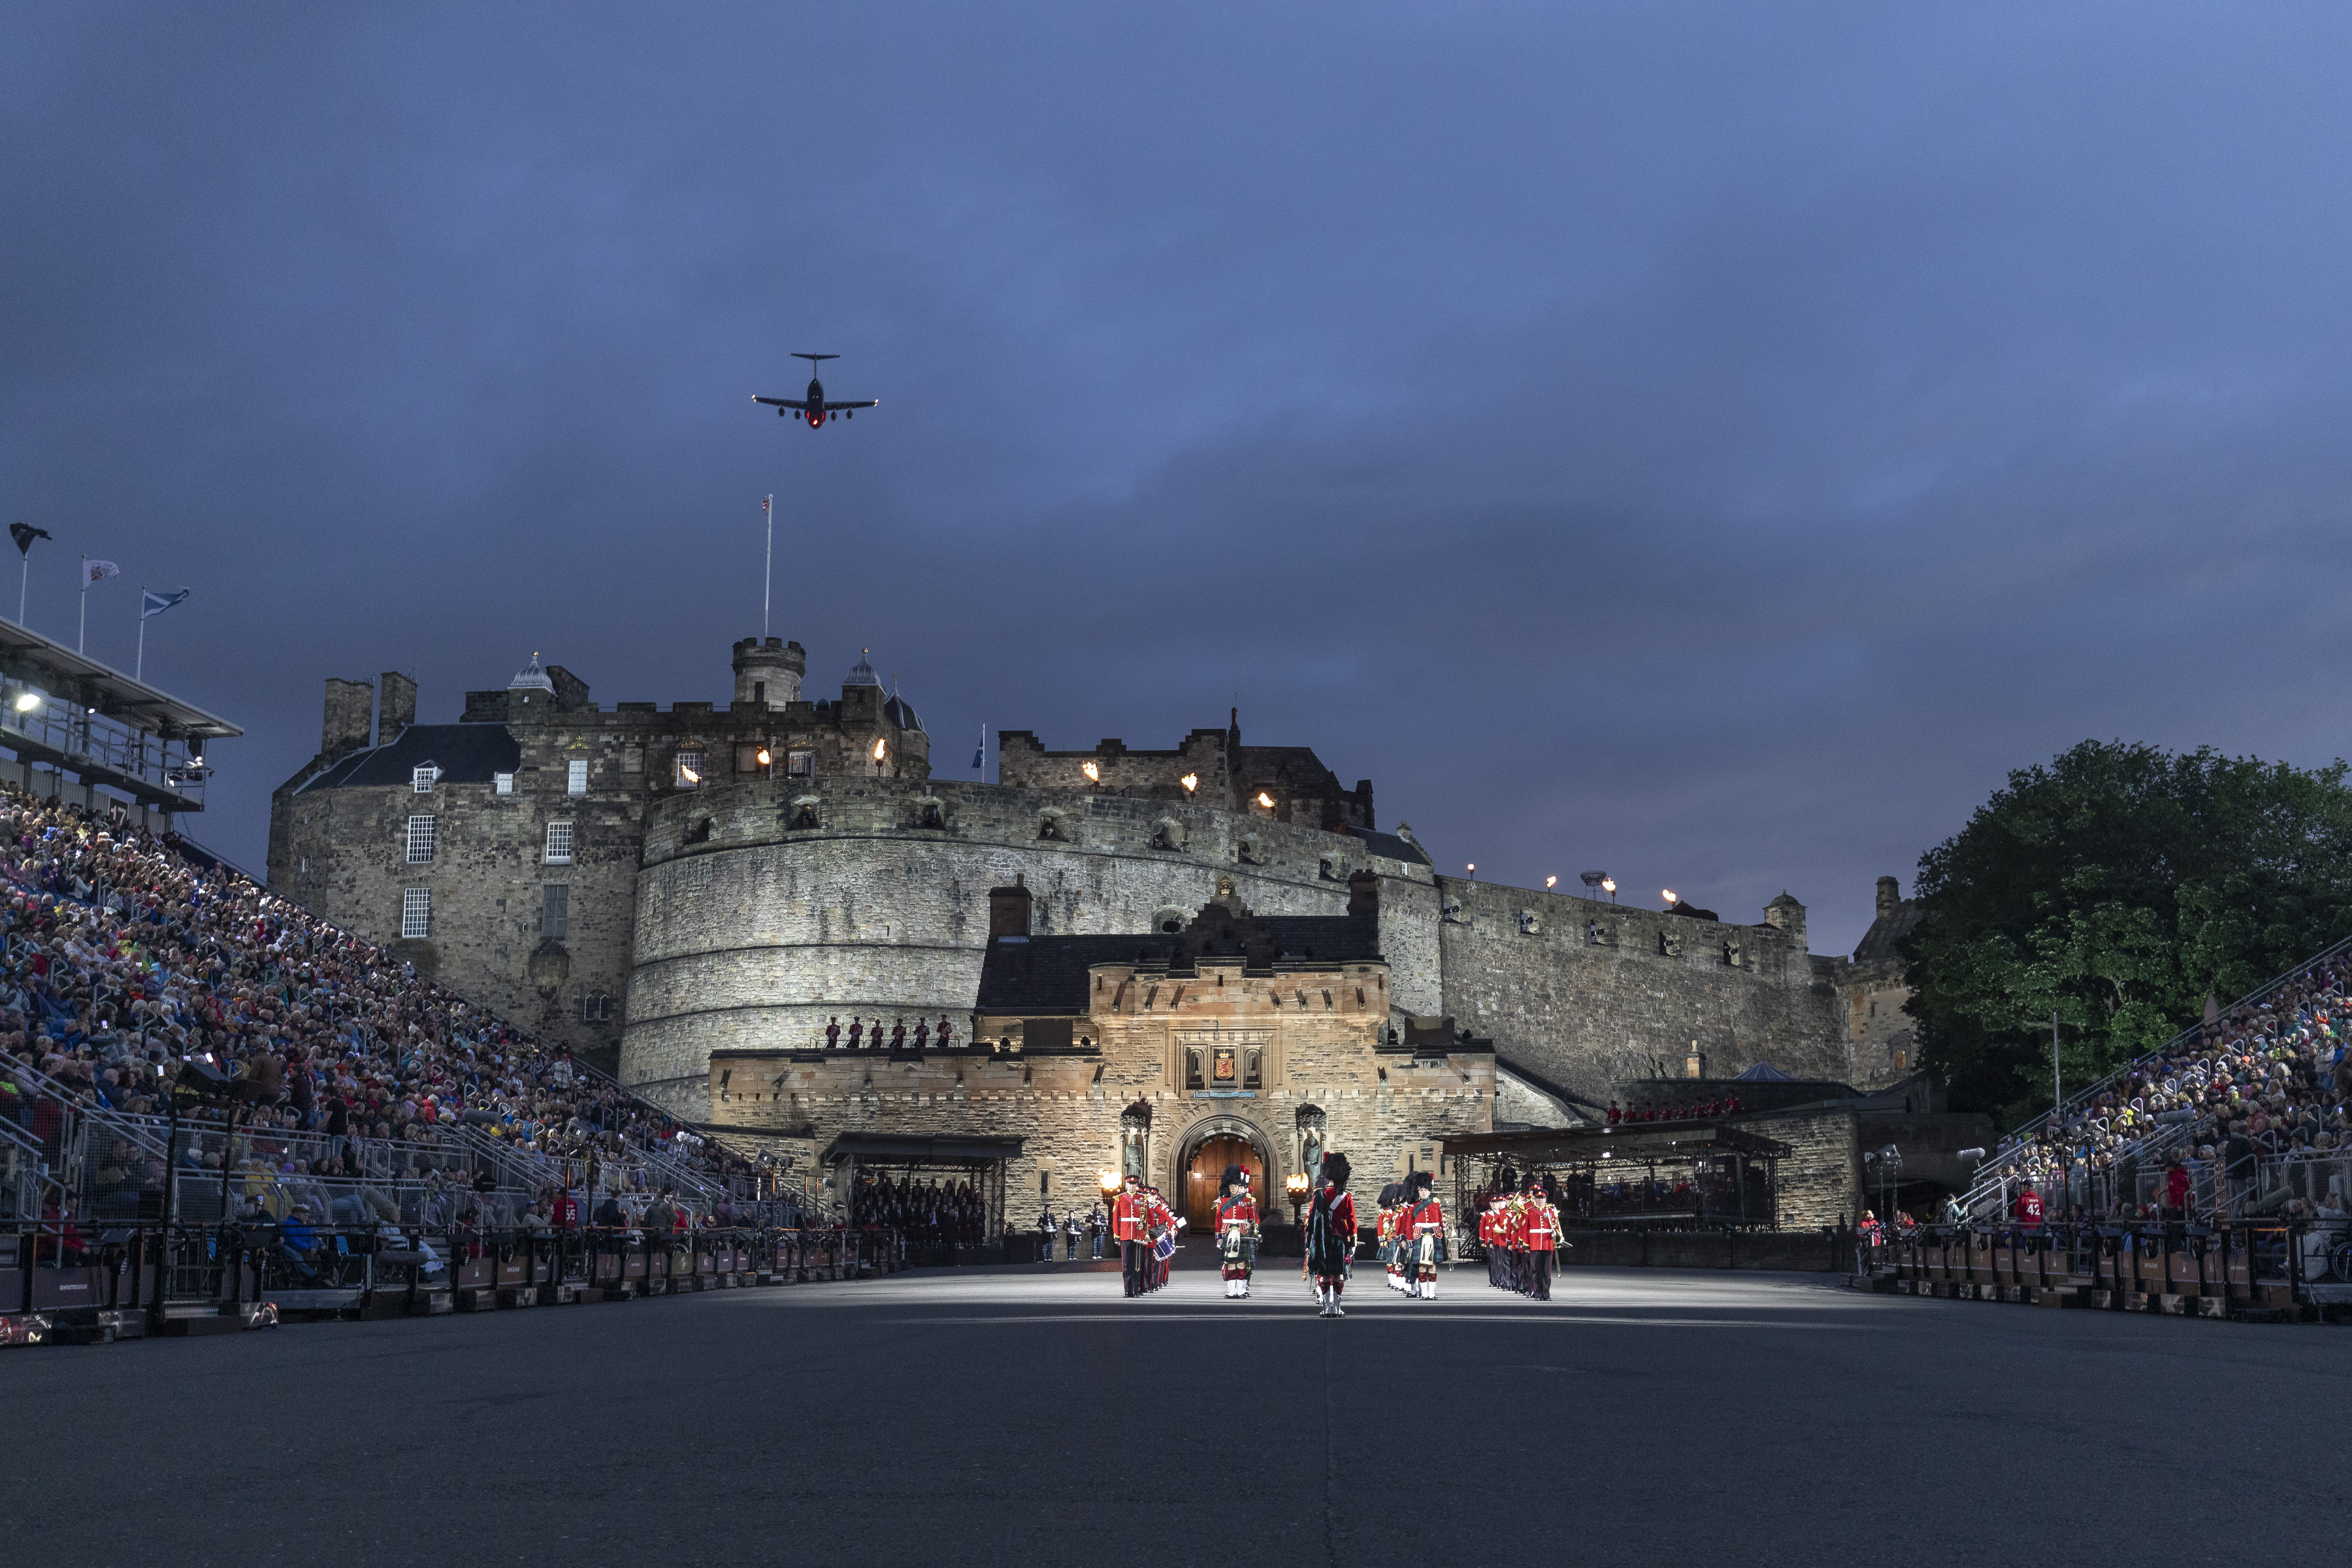 Image shows musicians outside Edinburgh Castle, with crowds and a flypast. 